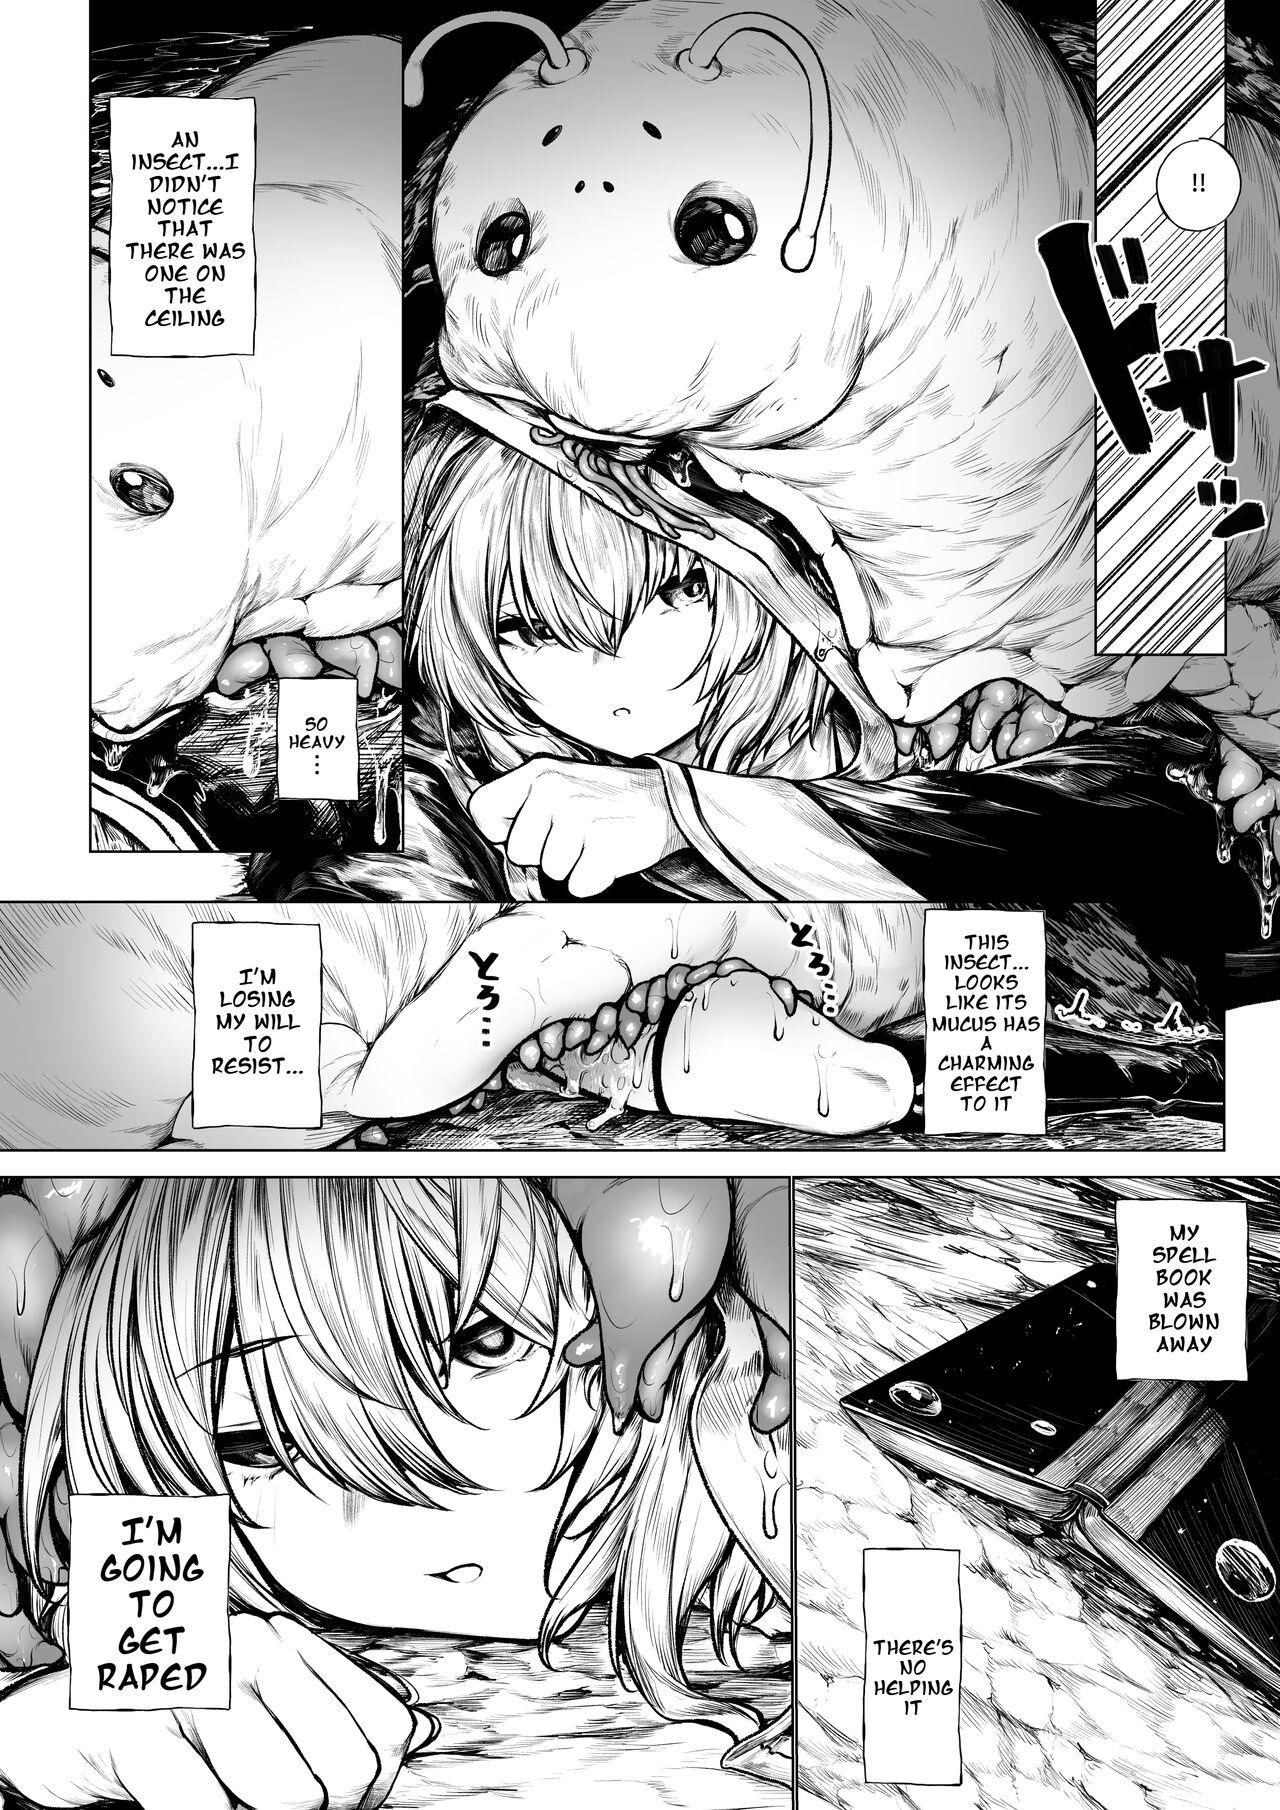 [Jury] Madoushi-chan ga Mushi Monster ni Osowareru Hanashi | A Story about a Mage Who Gets Attacked by an Insect Monster [KenGotTheLexGs] English 2